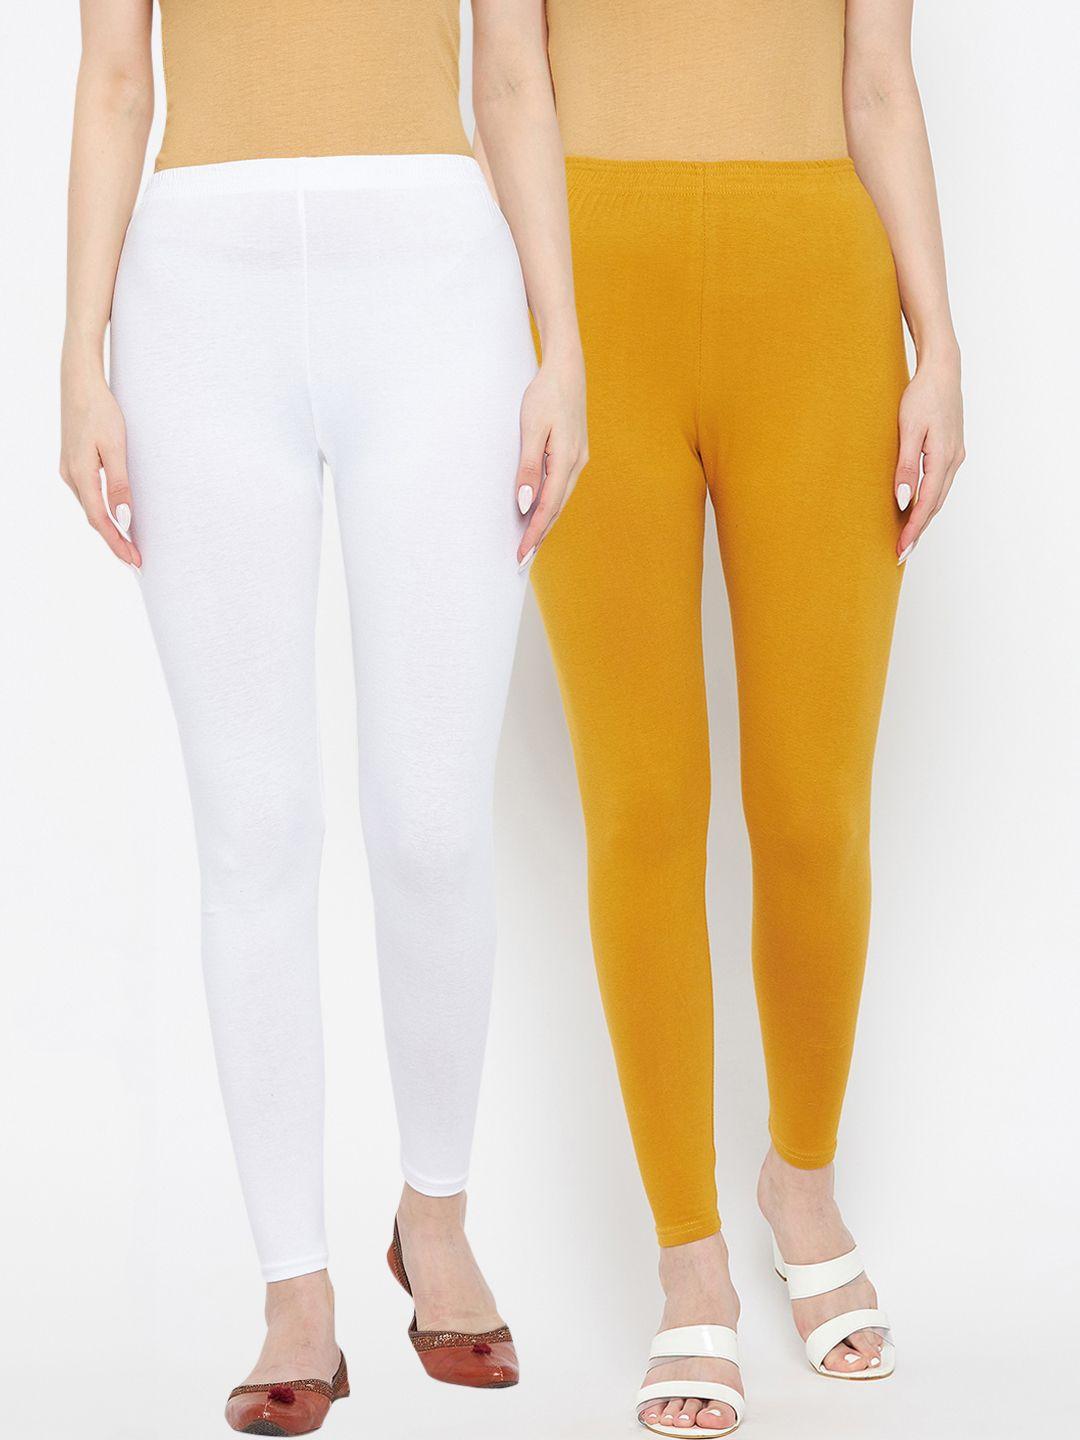 clora creation women mustard & off-white pack of 2 solid ankle-length leggings